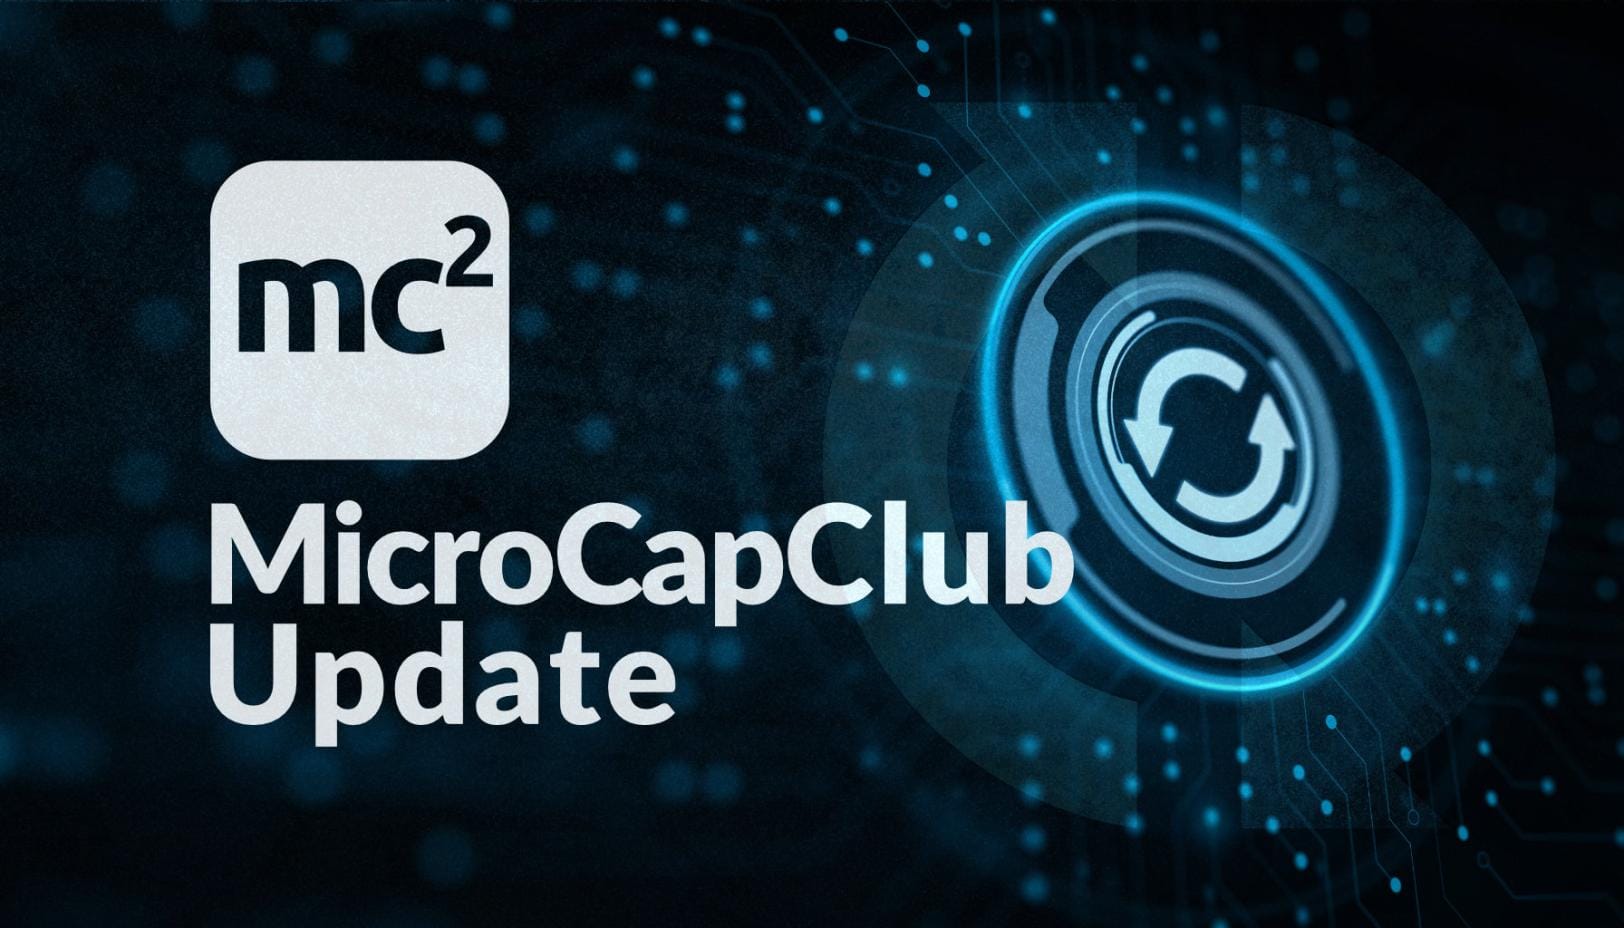 What's new at MicroCapClub